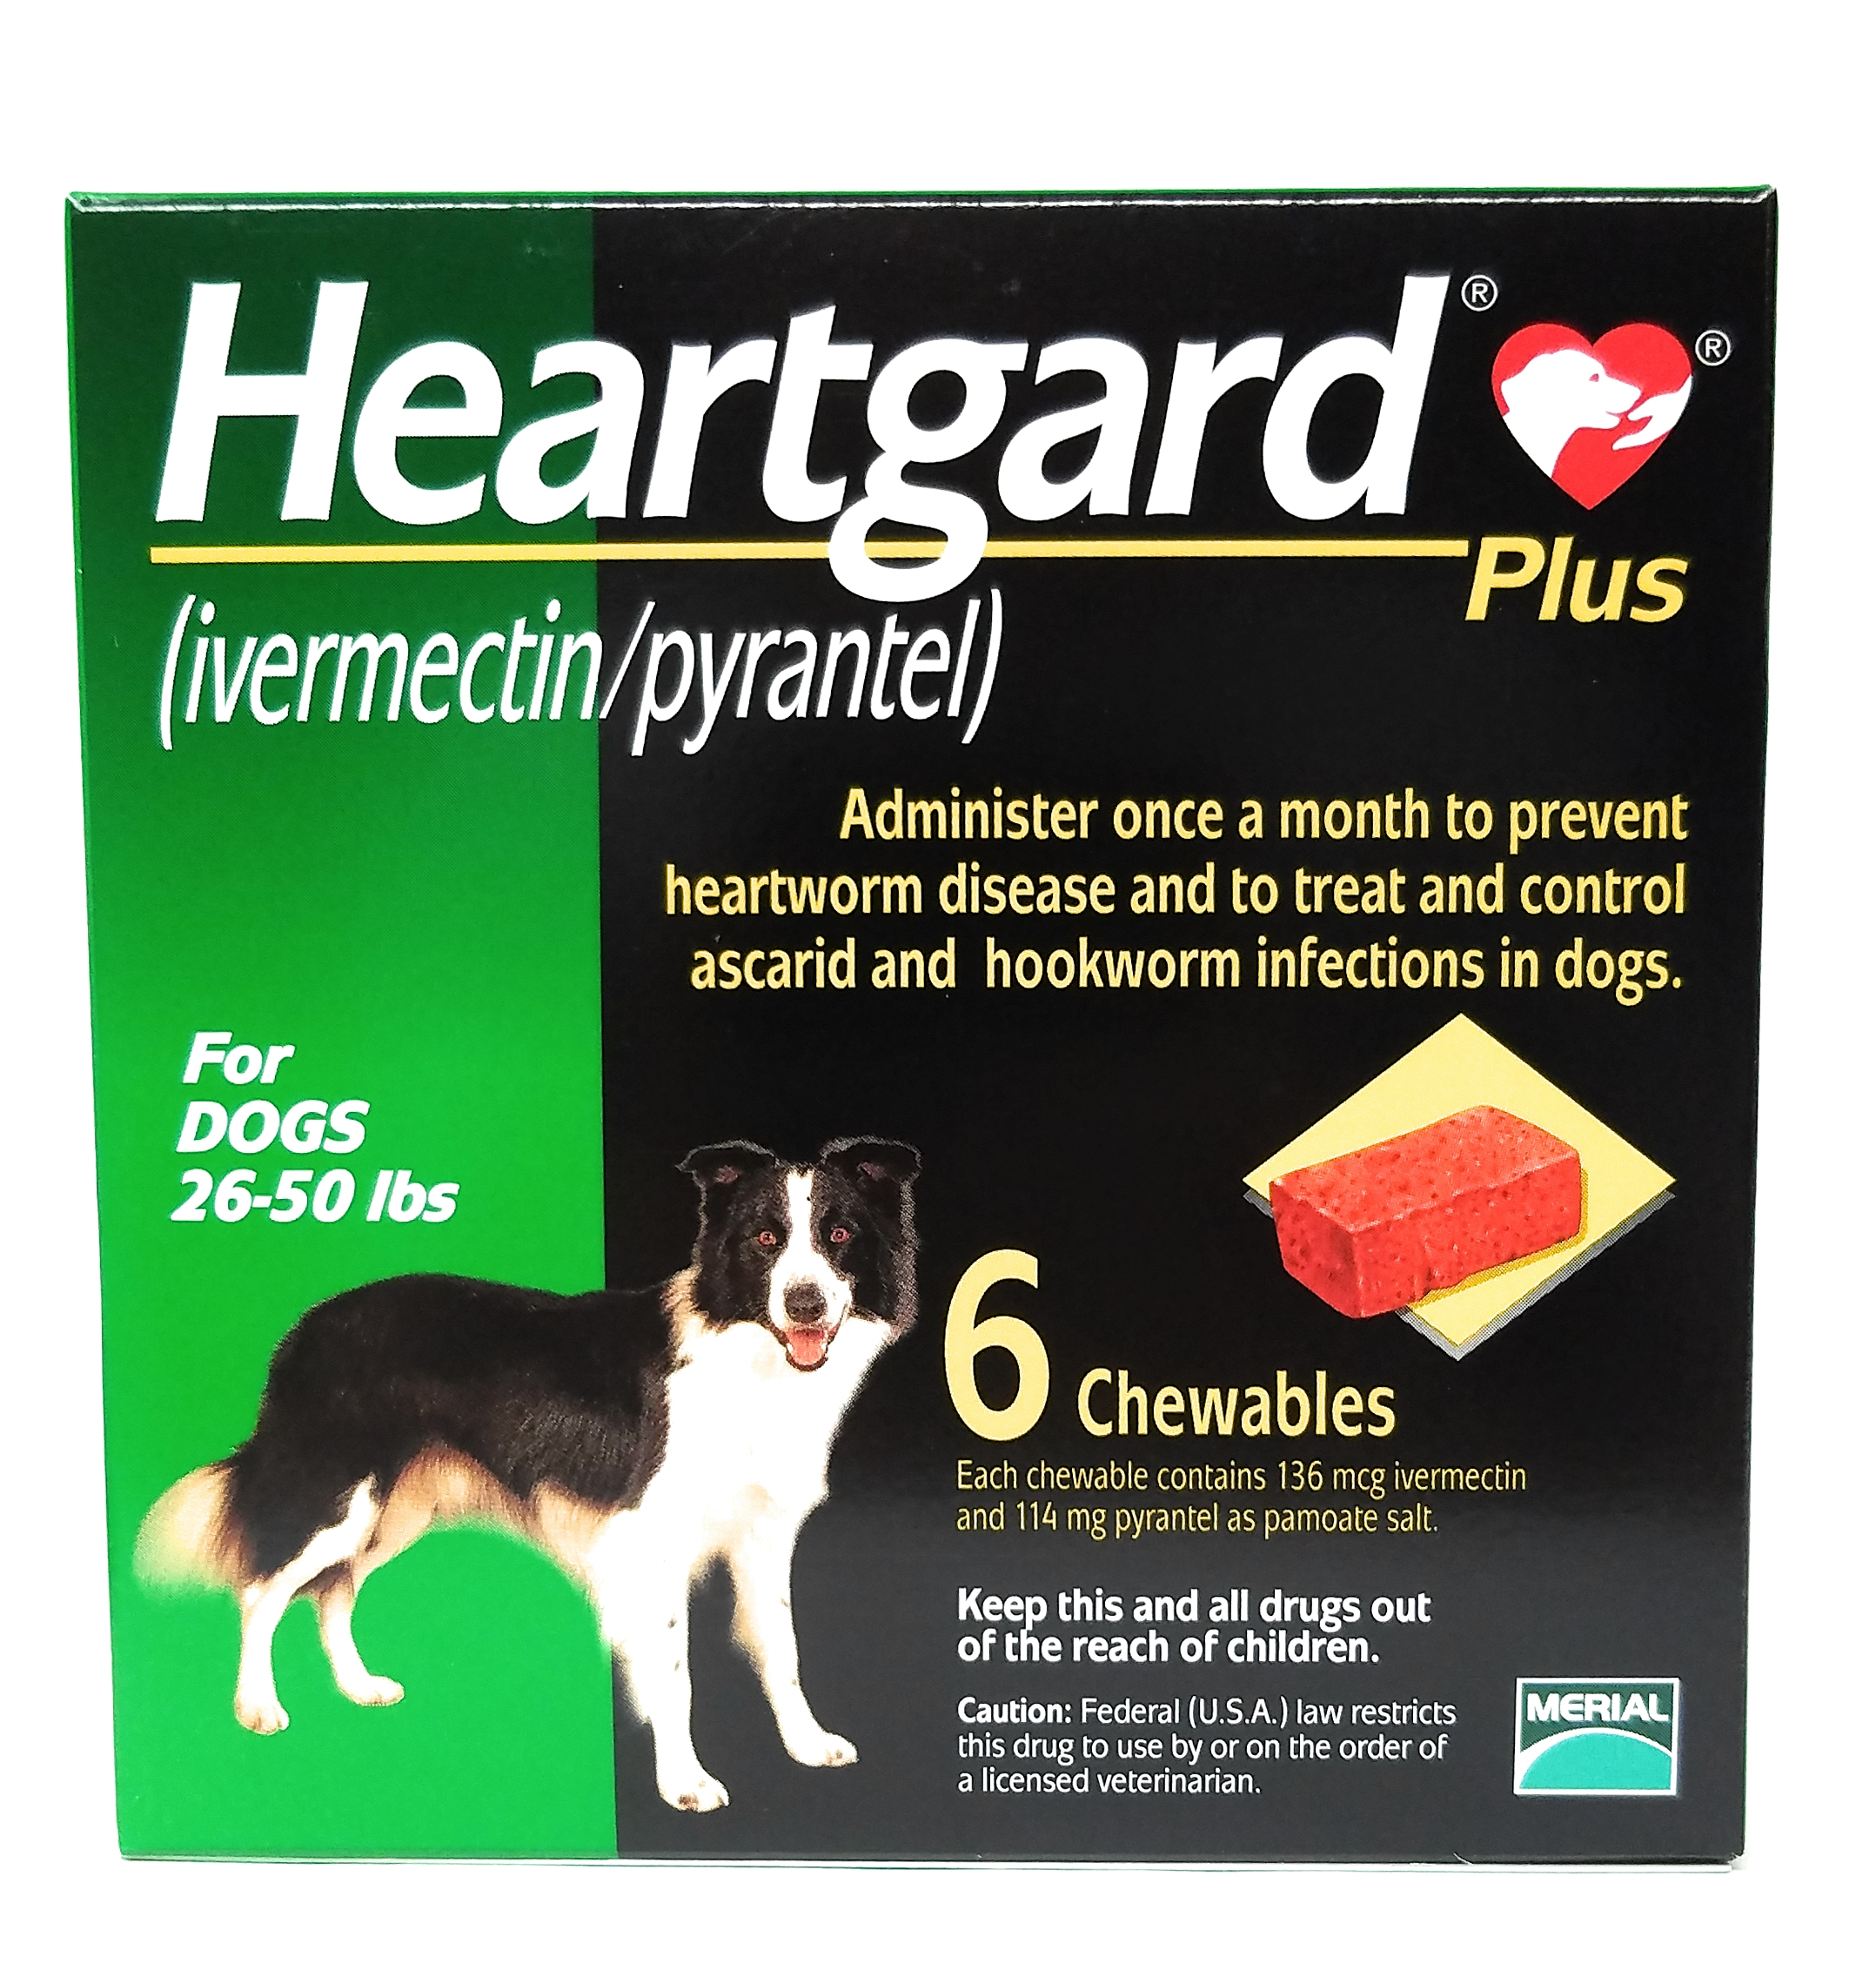 vet-approved-rx-heartgard-plus-for-dogs-26-50-lbs-6-doses